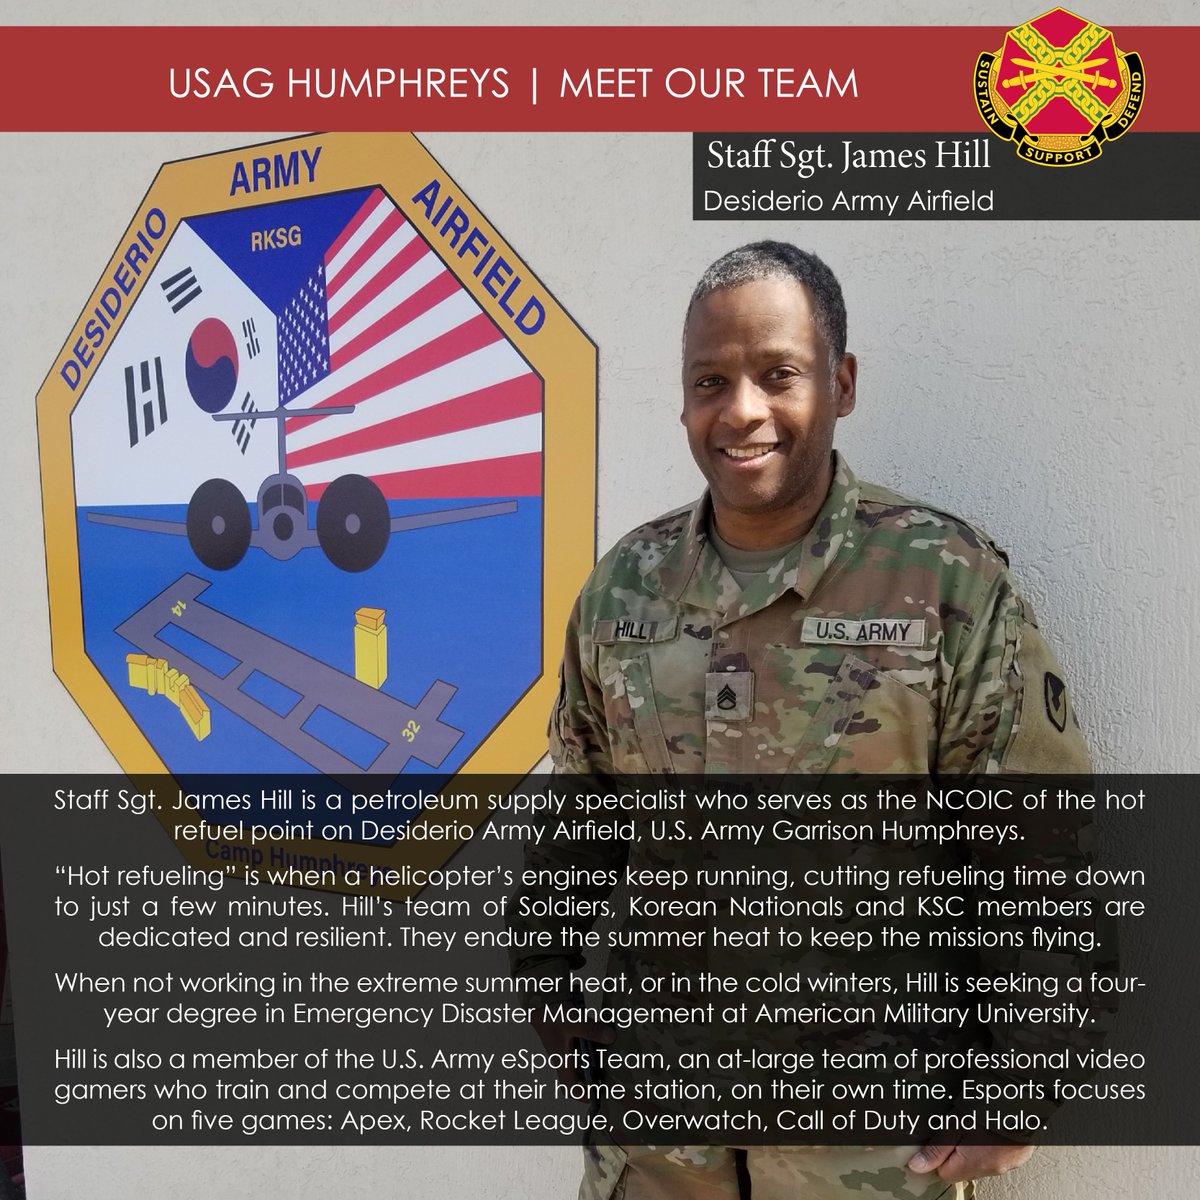 #MeetOurTeam Staff Sgt. James Hill is a petroleum supply specialist who serves as the NCOIC of the hot refuel point on Desiderio Army Airfield, #USAGHumphreys. When not working in the extreme summer heat Hill is seeking a four-year degree in Emergency Disaster Management.